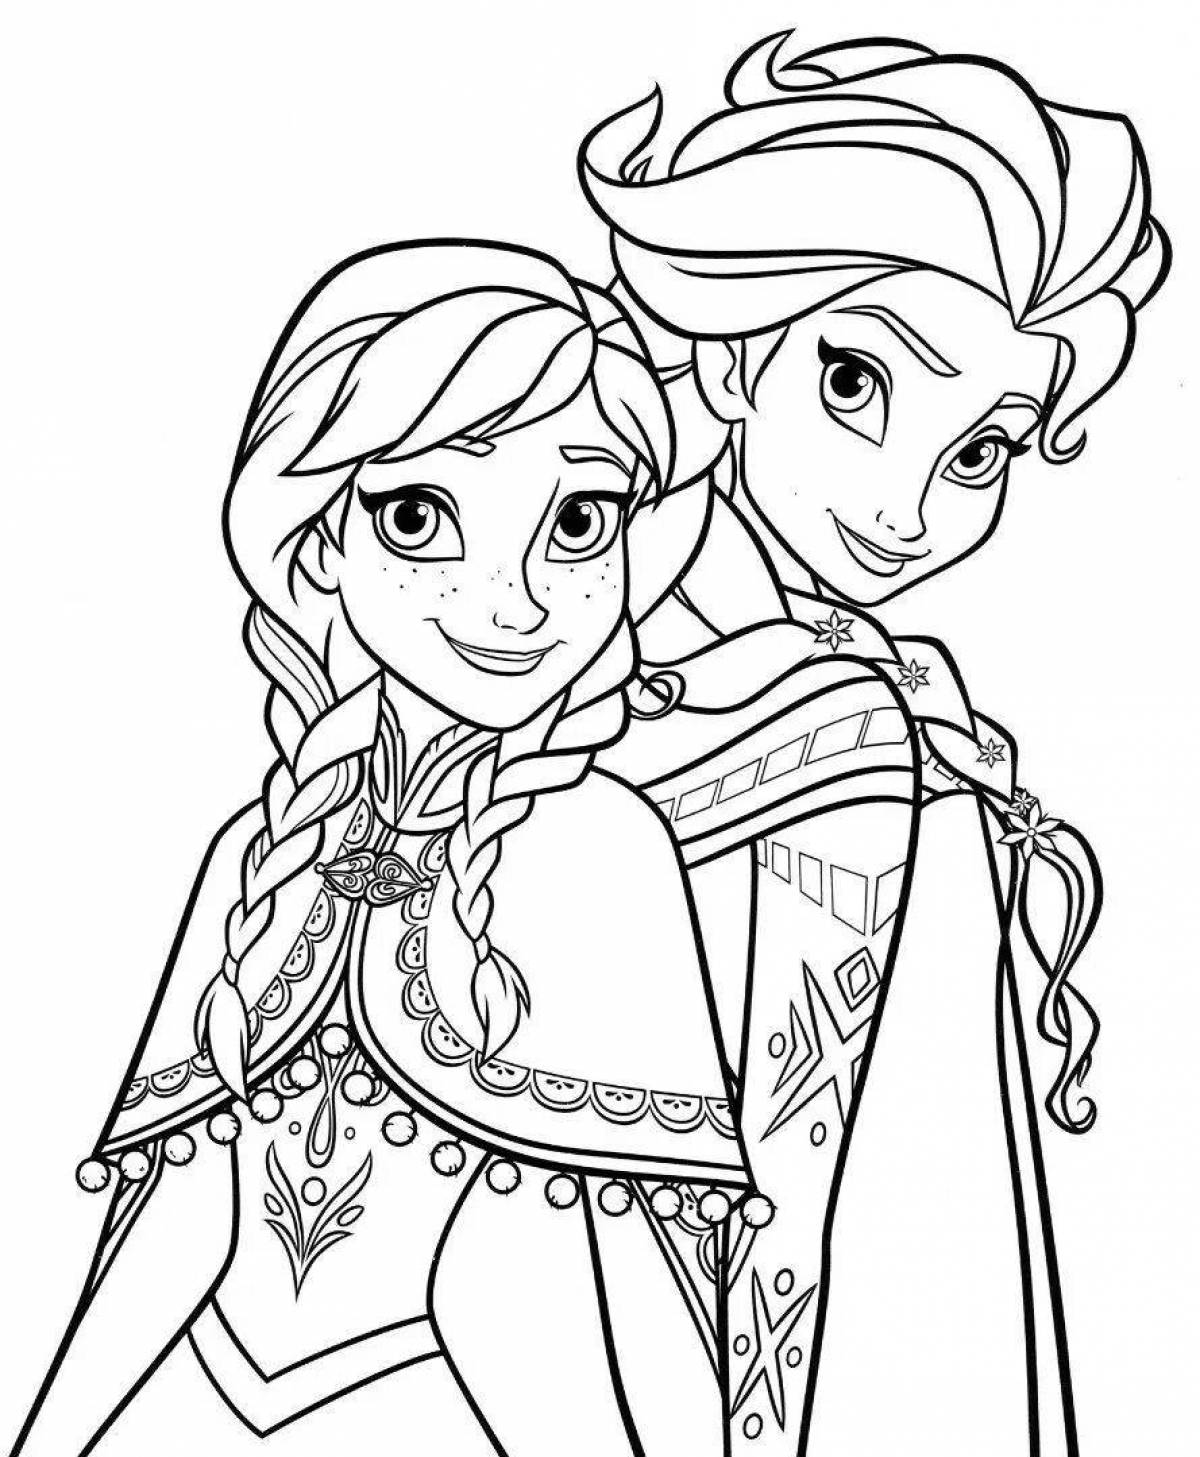 Frozen 2 bright coloring for girls